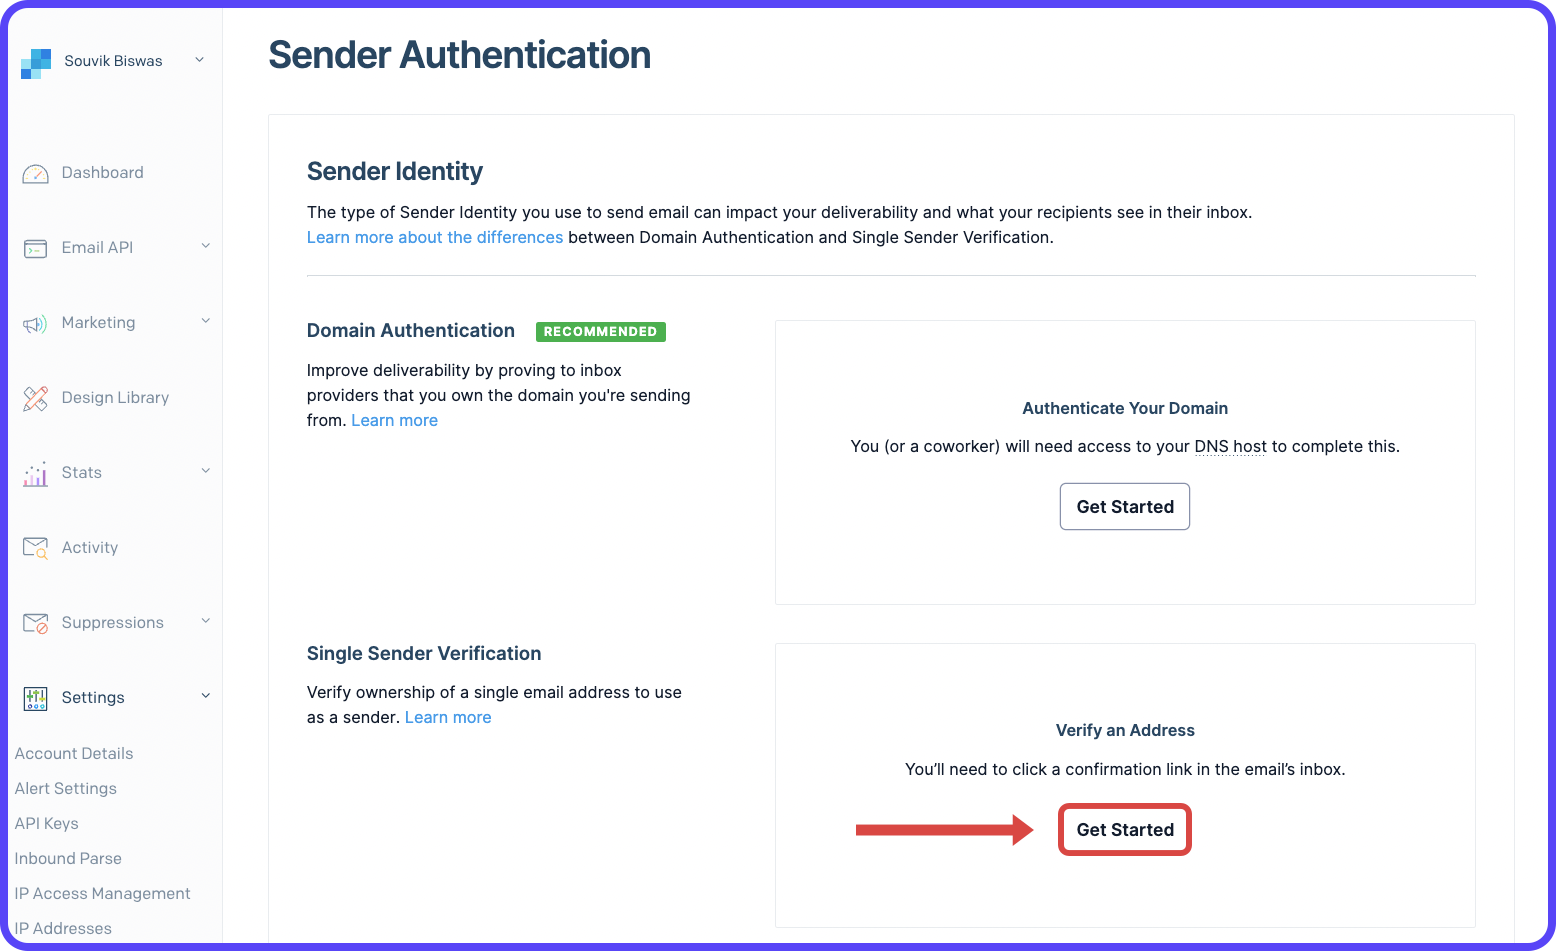 Sender Authentication page with Get Started button highlighted